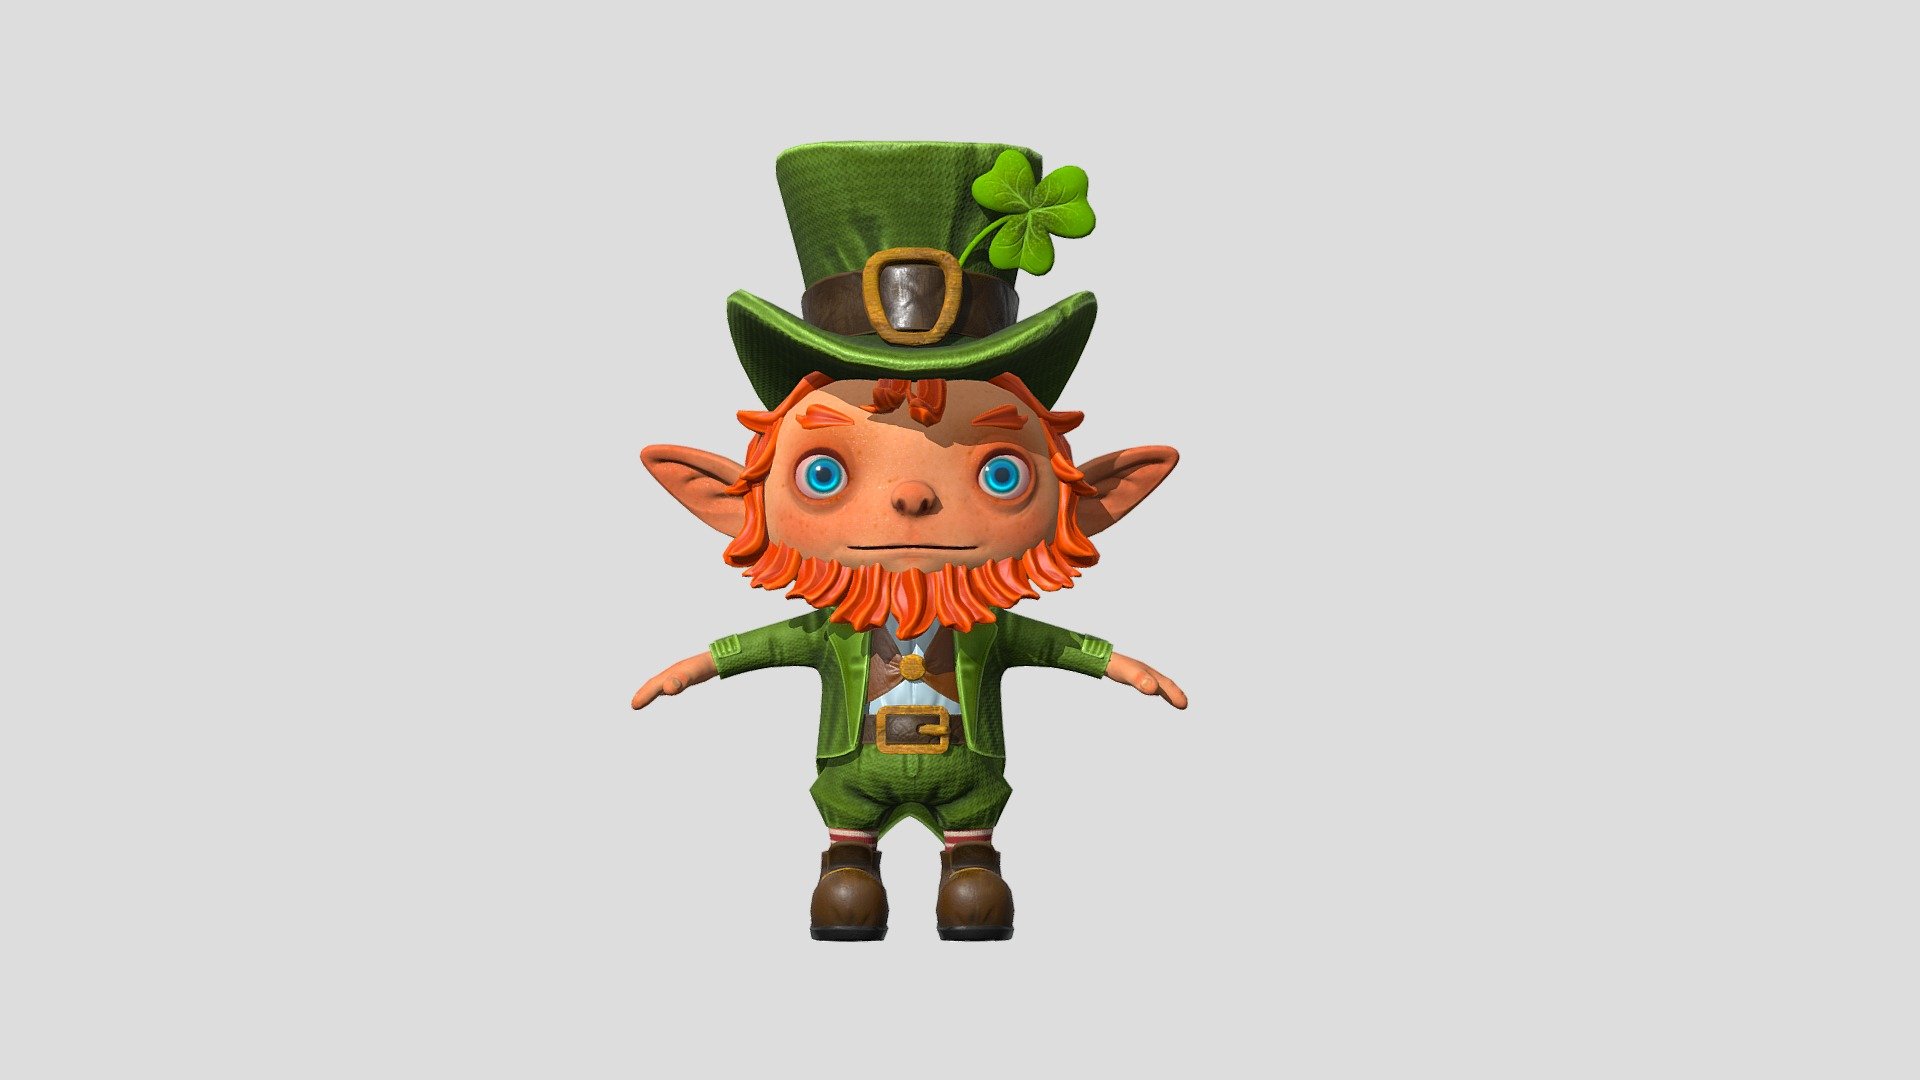 Leprechaun 3D model. Finished game lowpoly model with PBR Textures.
You can remove the character's coat and clover, and you get a guy in a white shirt and waistcoat

This cute character wants to be the star of your project!

Two formats are available: FBX, OBJ

PBR Maps: 3 maps x 4096x4096/png Normal Albedo Roughness Metalness Ao

Subdivision: 
Polygons: 13 056 
Triangles: 25 958 
Vertex: 13 932 - Leprechaun lowpoly - 3D model by Saniodesign 3d model